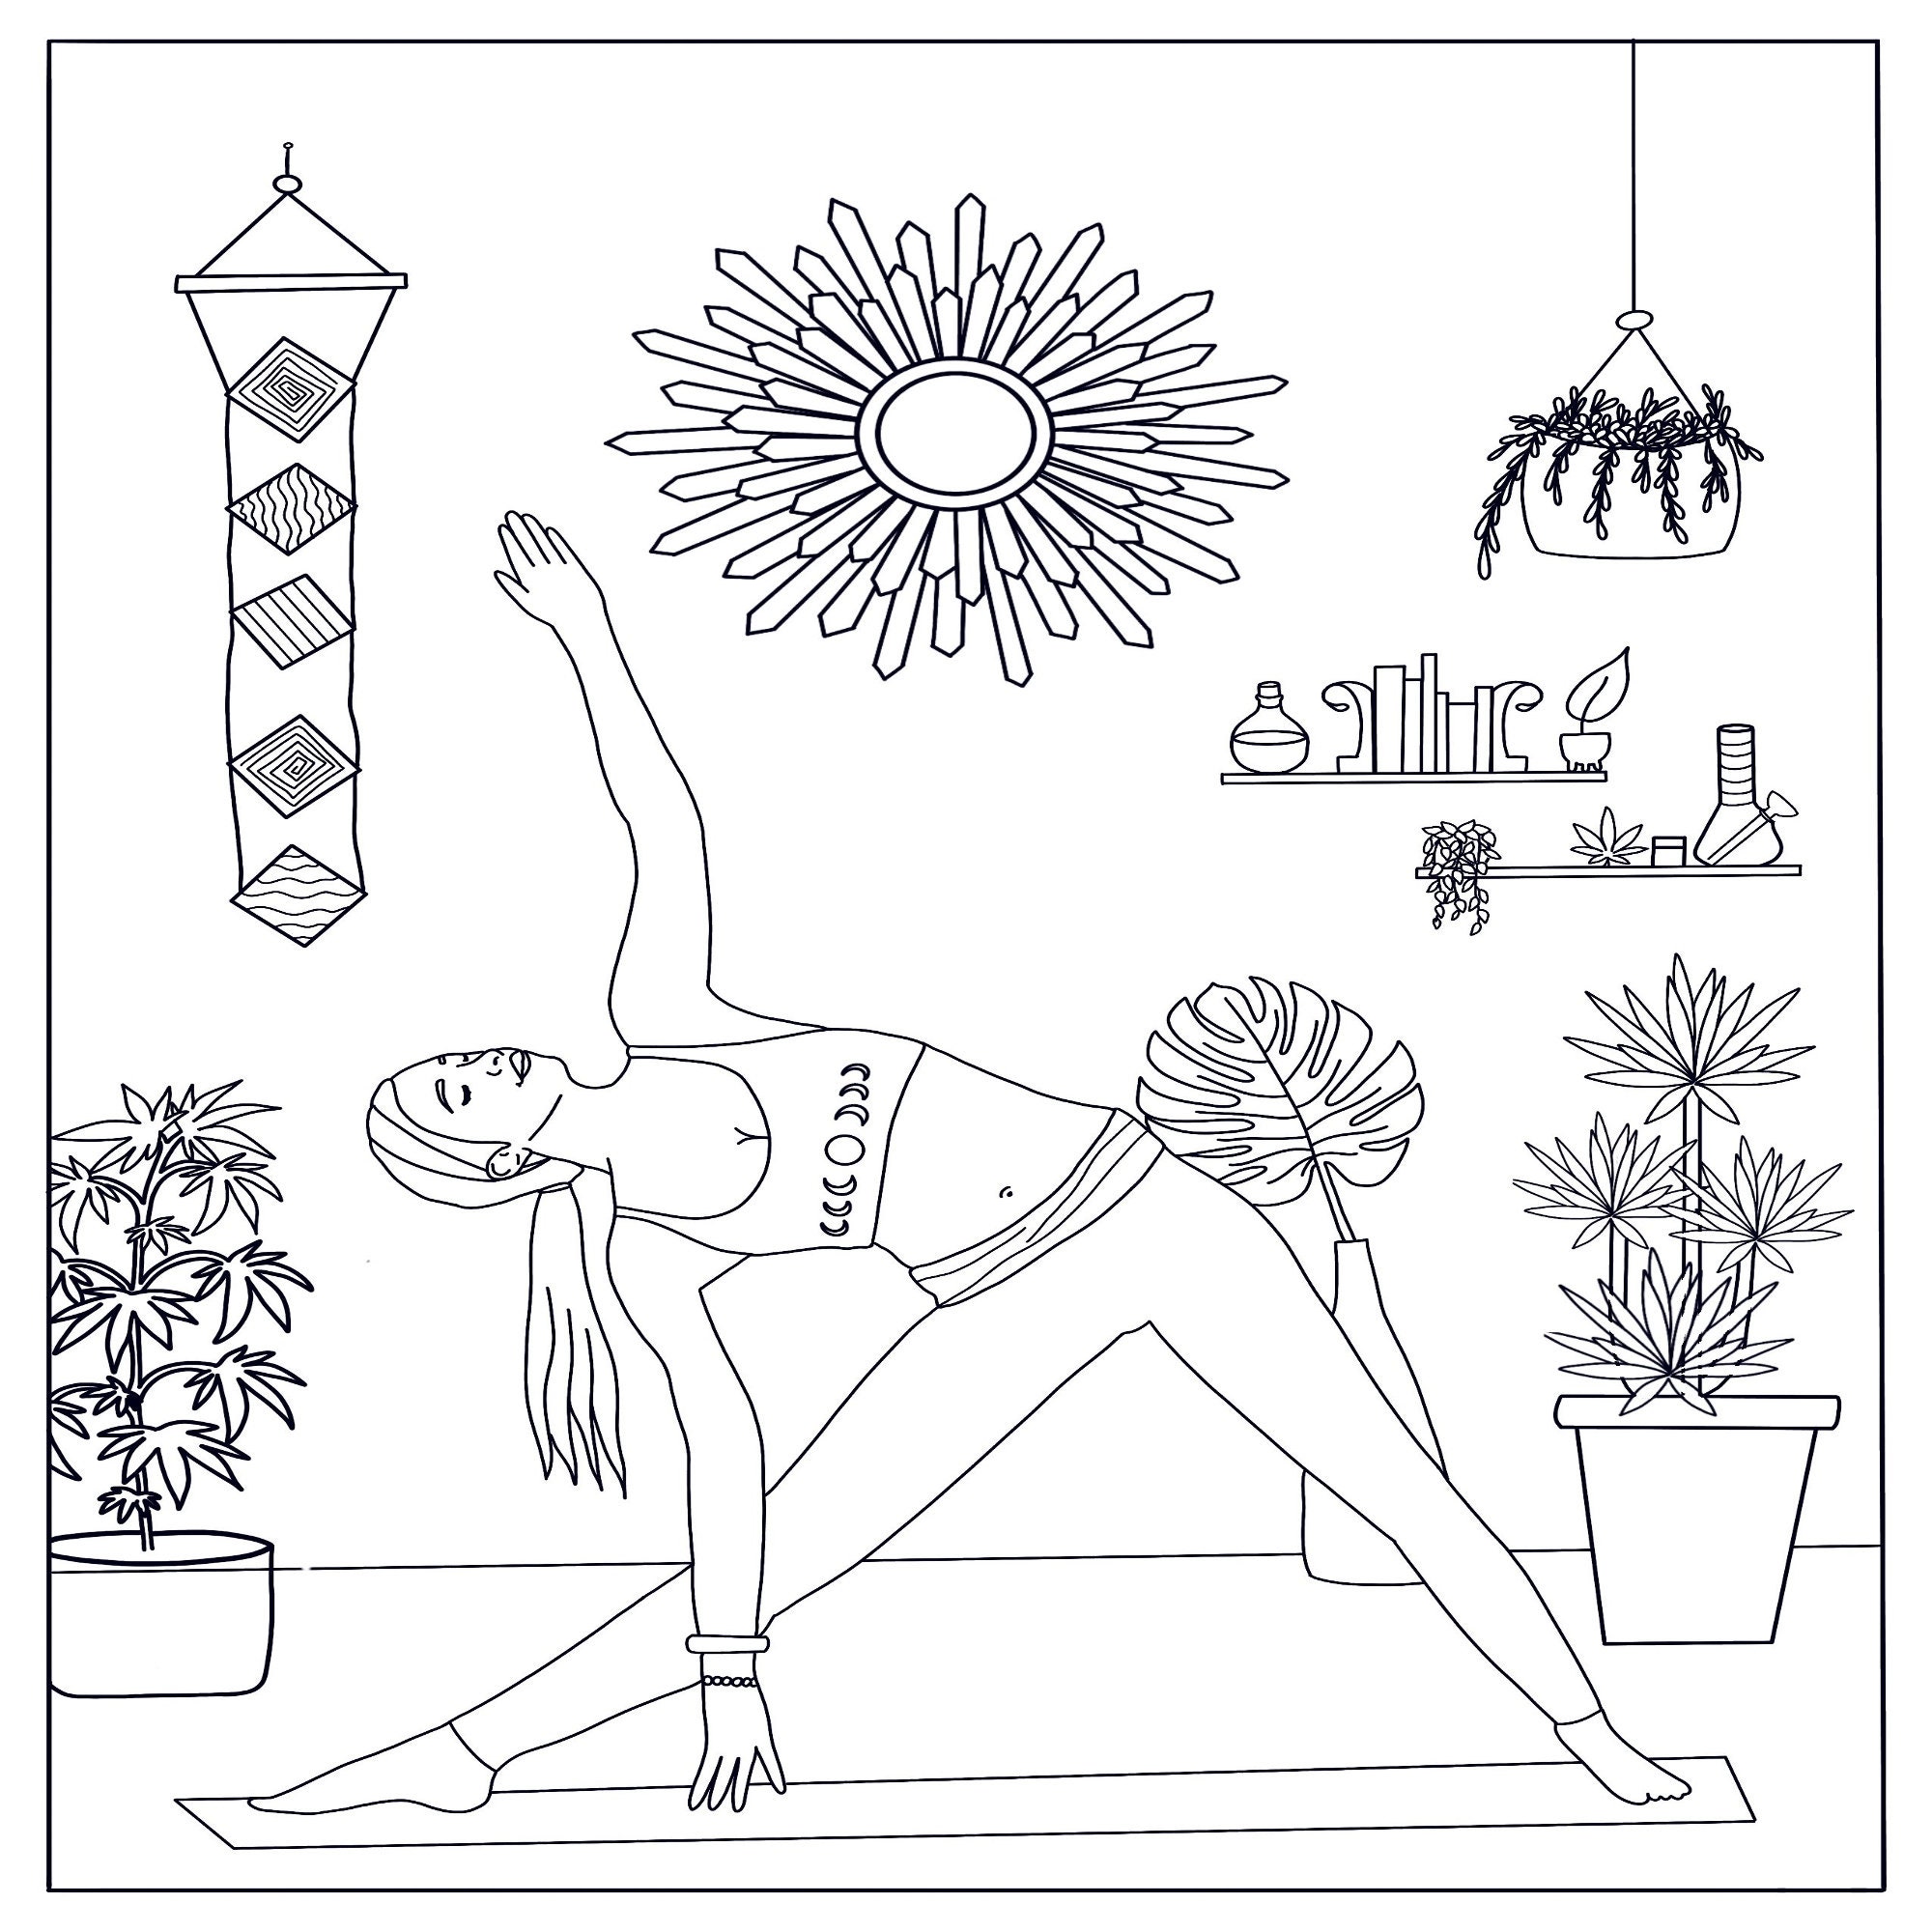 Yoga Coloring Page - Etsy